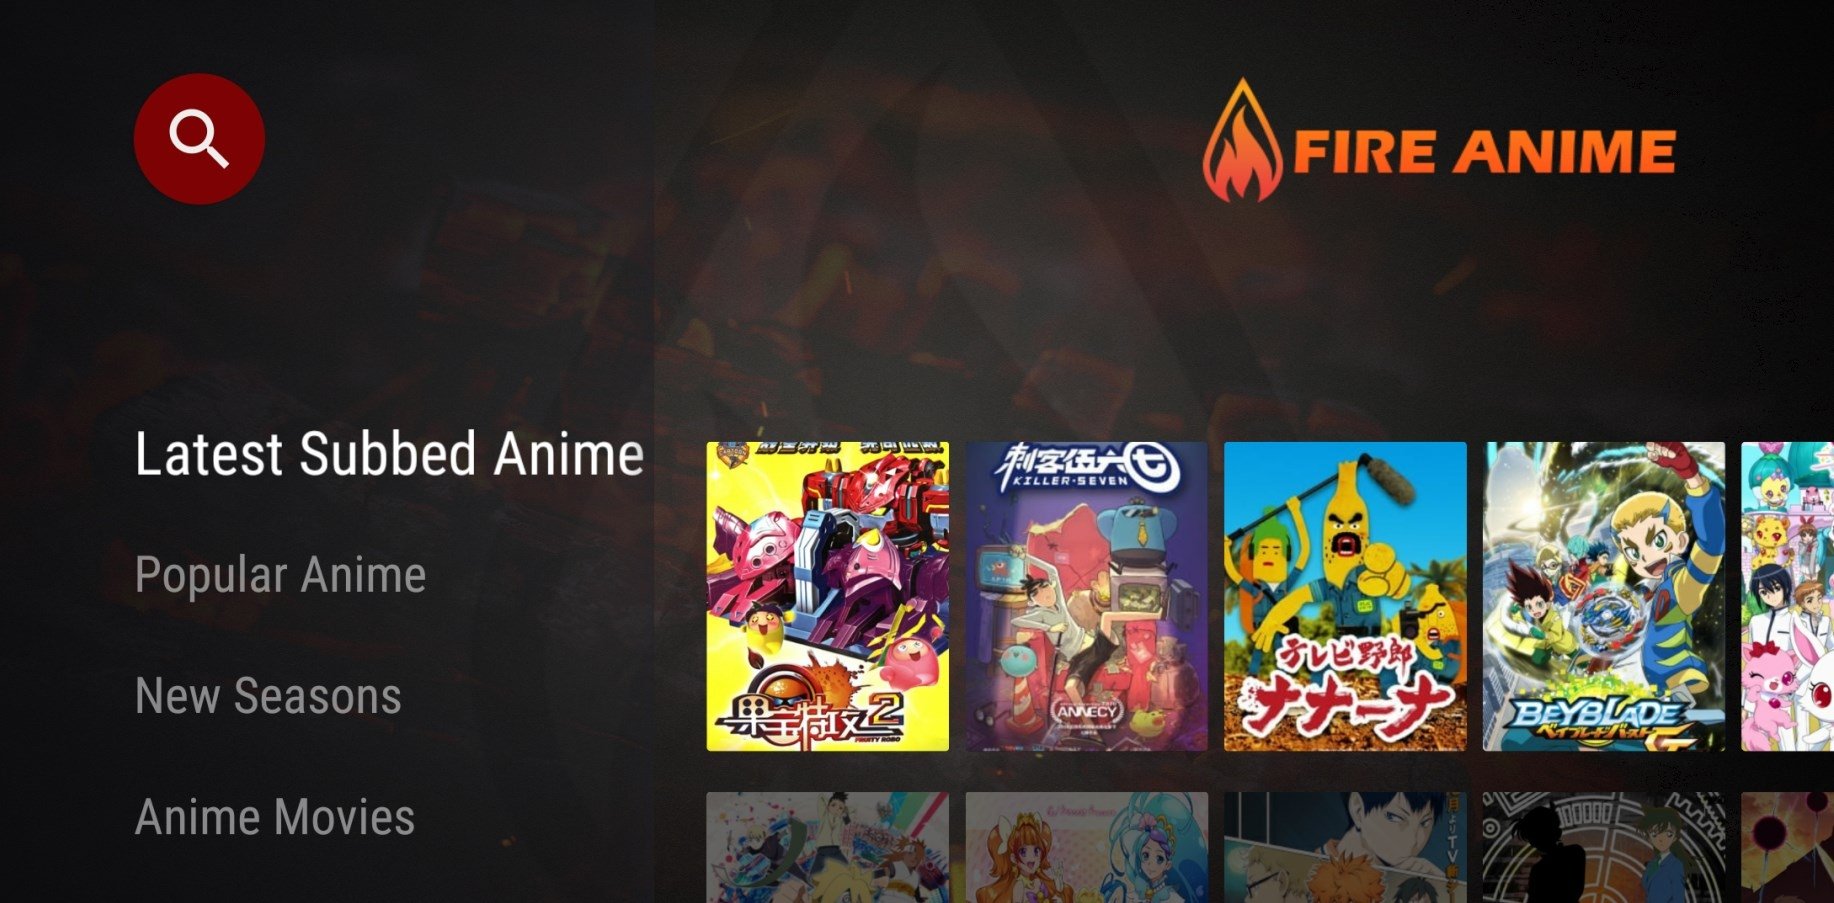 FireAnime APK download - FireAnime for Android Free